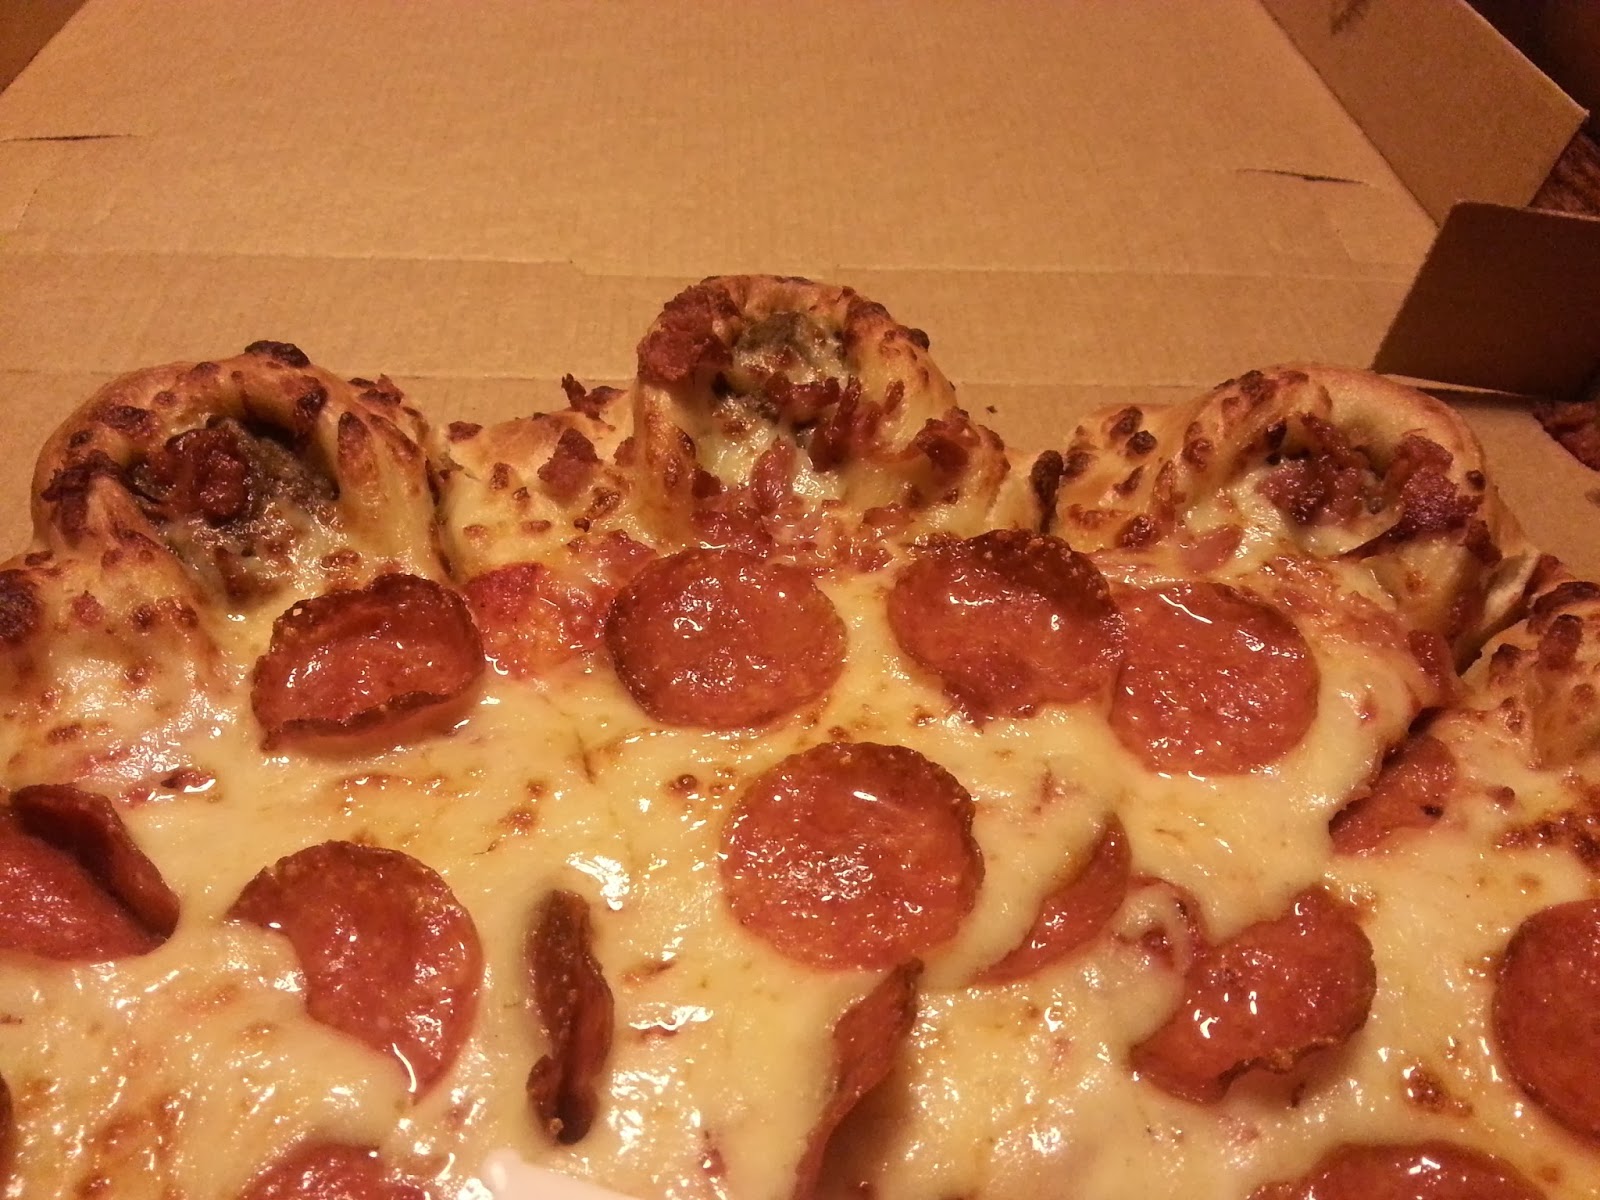 Cheeseburger pizza from Pizza Hut. Exactly as you'd imagine it would be.